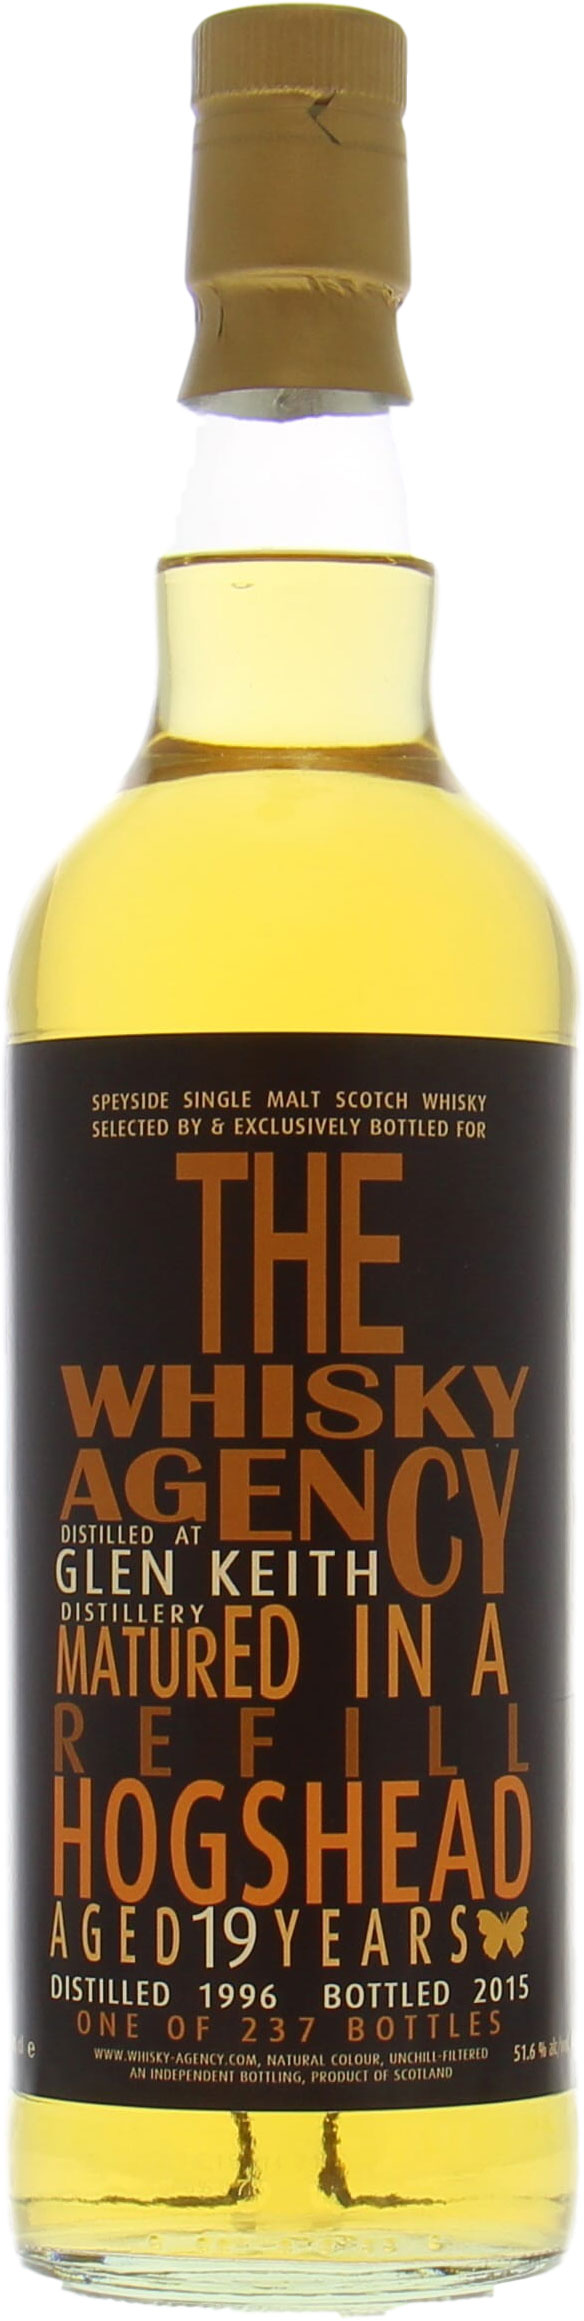 Glen Keith - 19 Years Old The Whisky Agency 51.6% 1996 Perfect